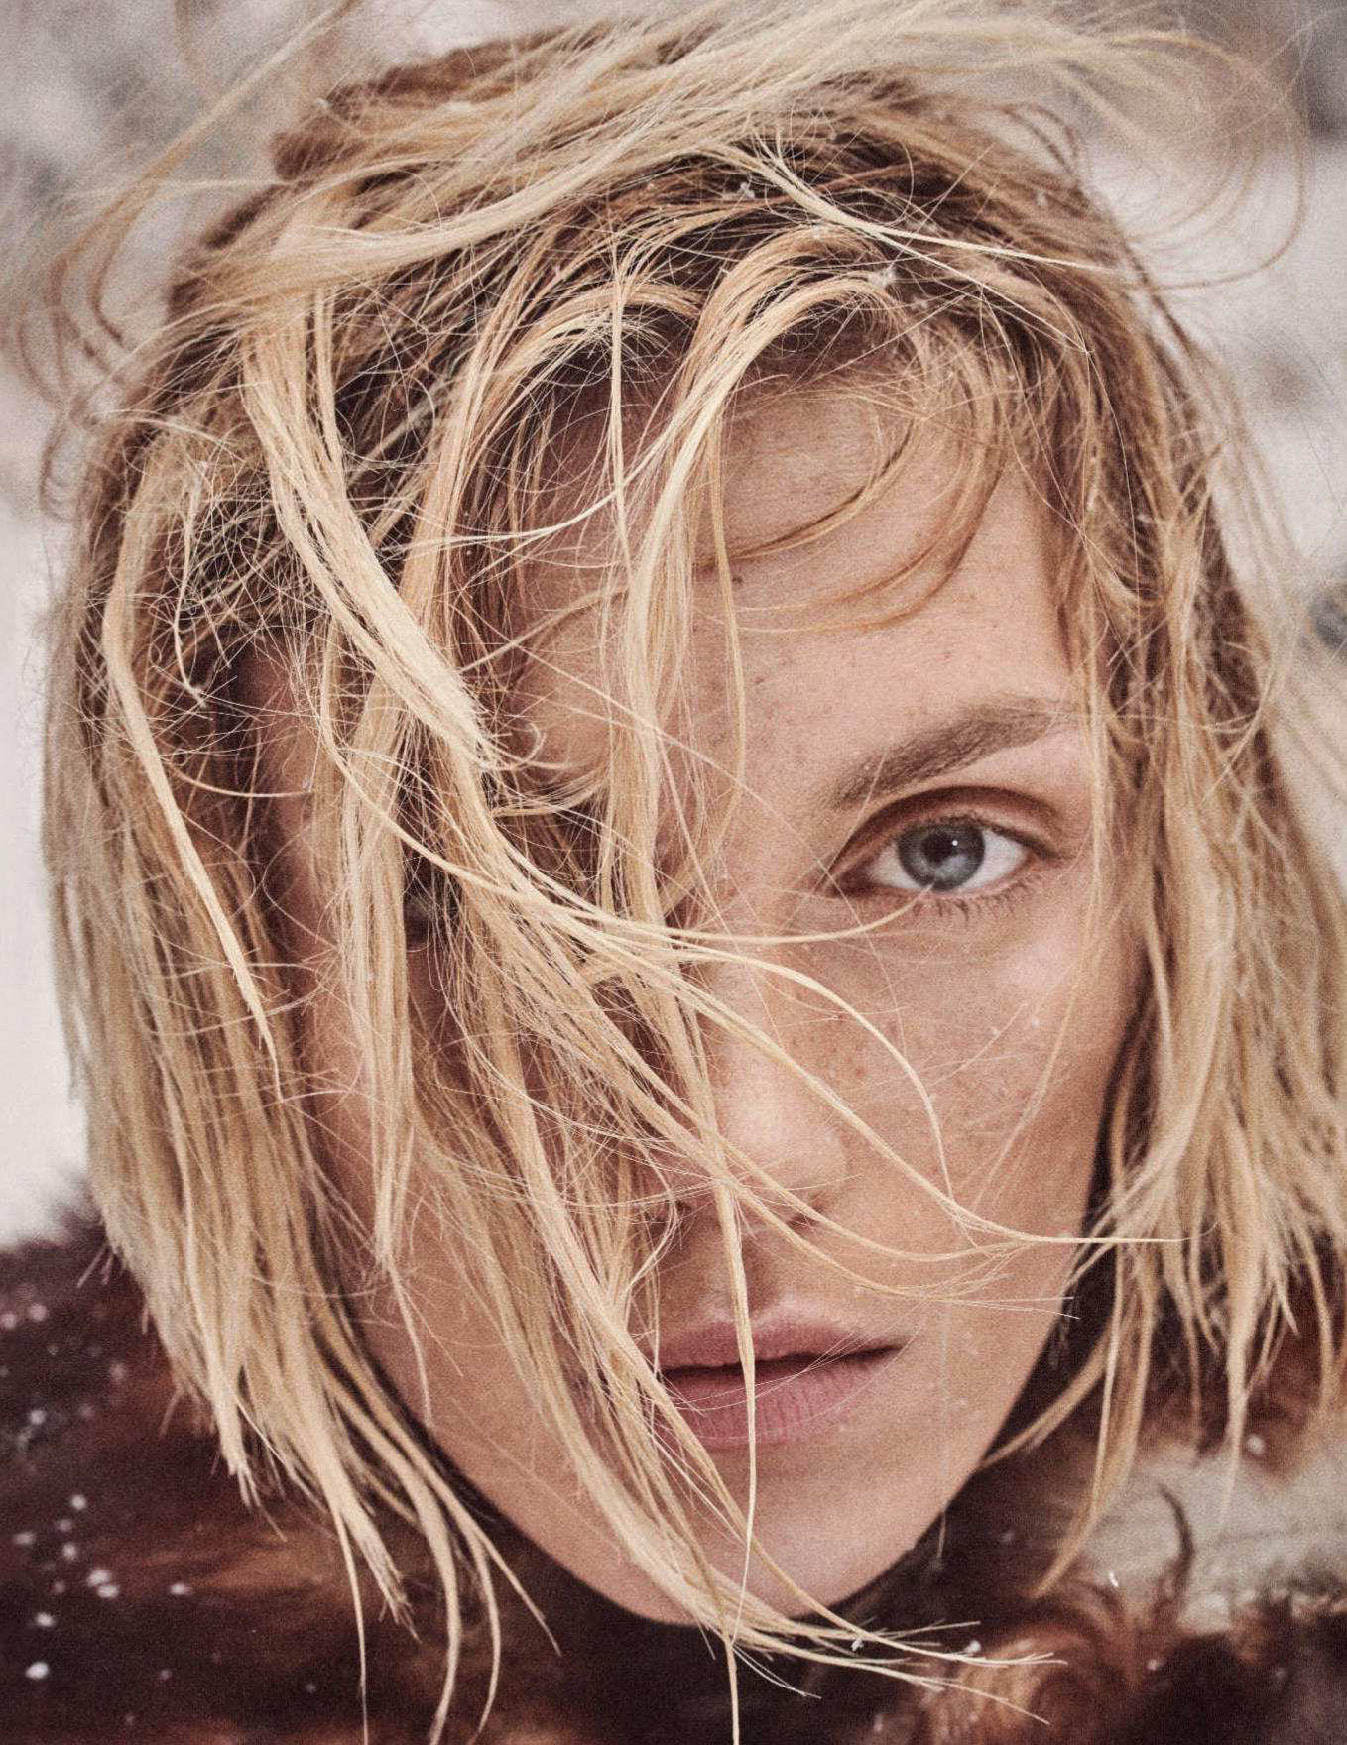 Anja Rubik by Giampaolo Sgura for Vogue Germany Dec 2018 (7).jpg